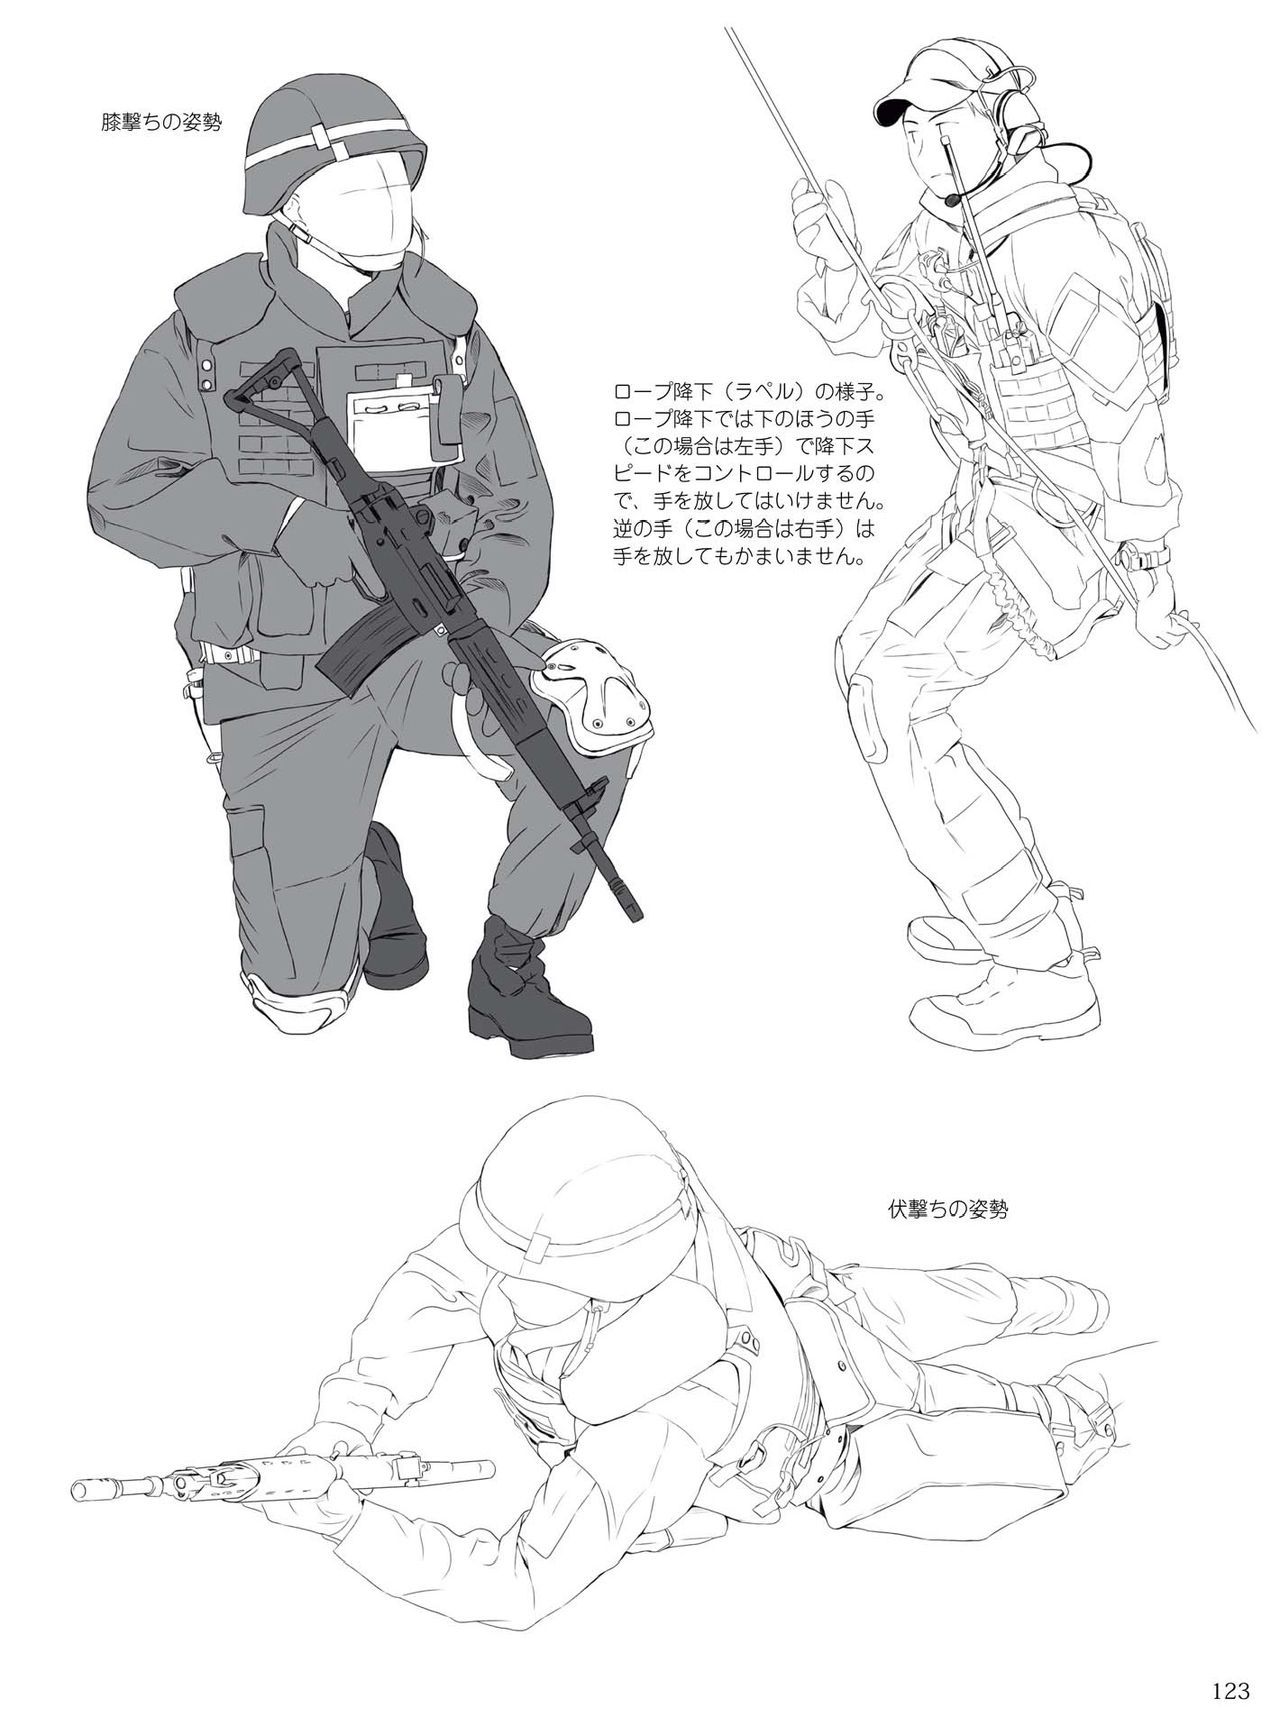 How to draw military uniforms and uniforms From Self-Defense Forces 軍服・制服の描き方 アメリカ軍・自衛隊の制服から戦闘服まで 126